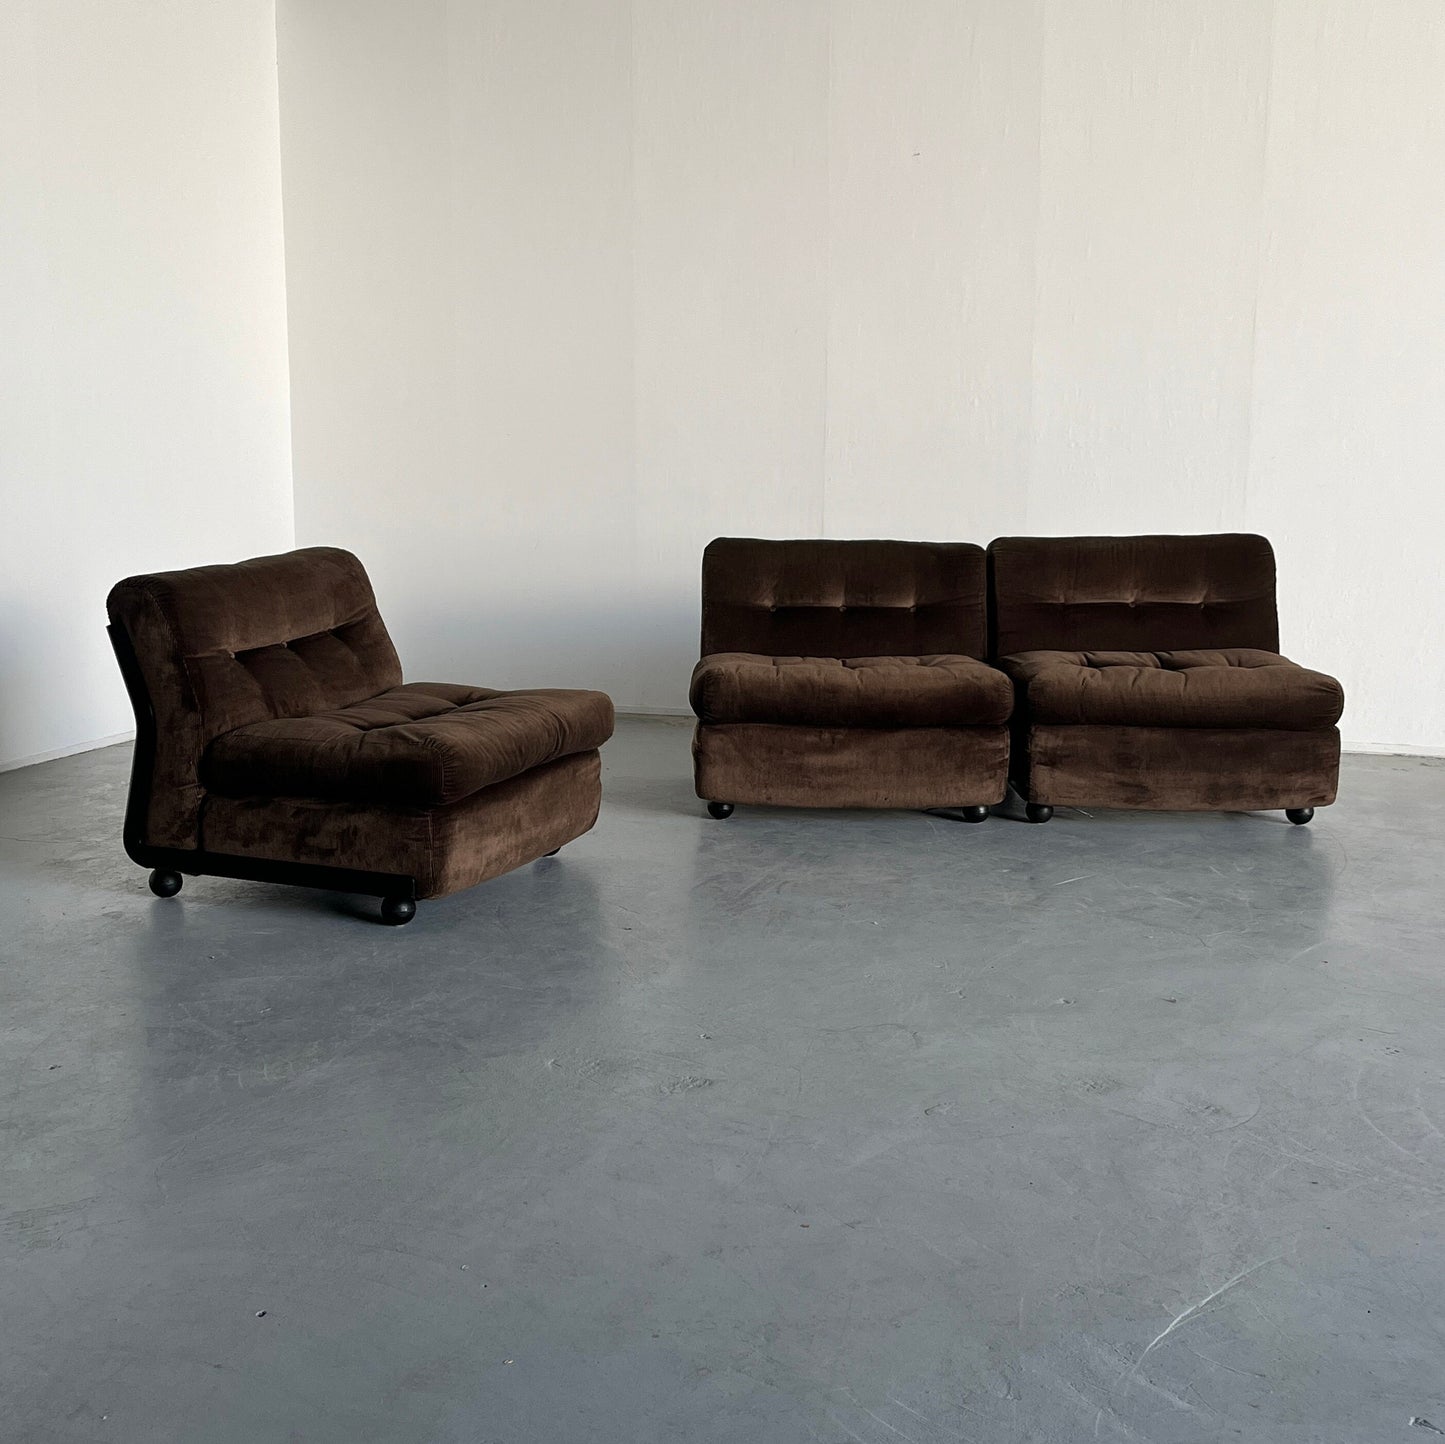 1 of 3 Iconic 'Amanta' chairs by Mario Bellini for B&B Italia / Vintage Modernist Design Modular Sofa Modules, 1970s Italy